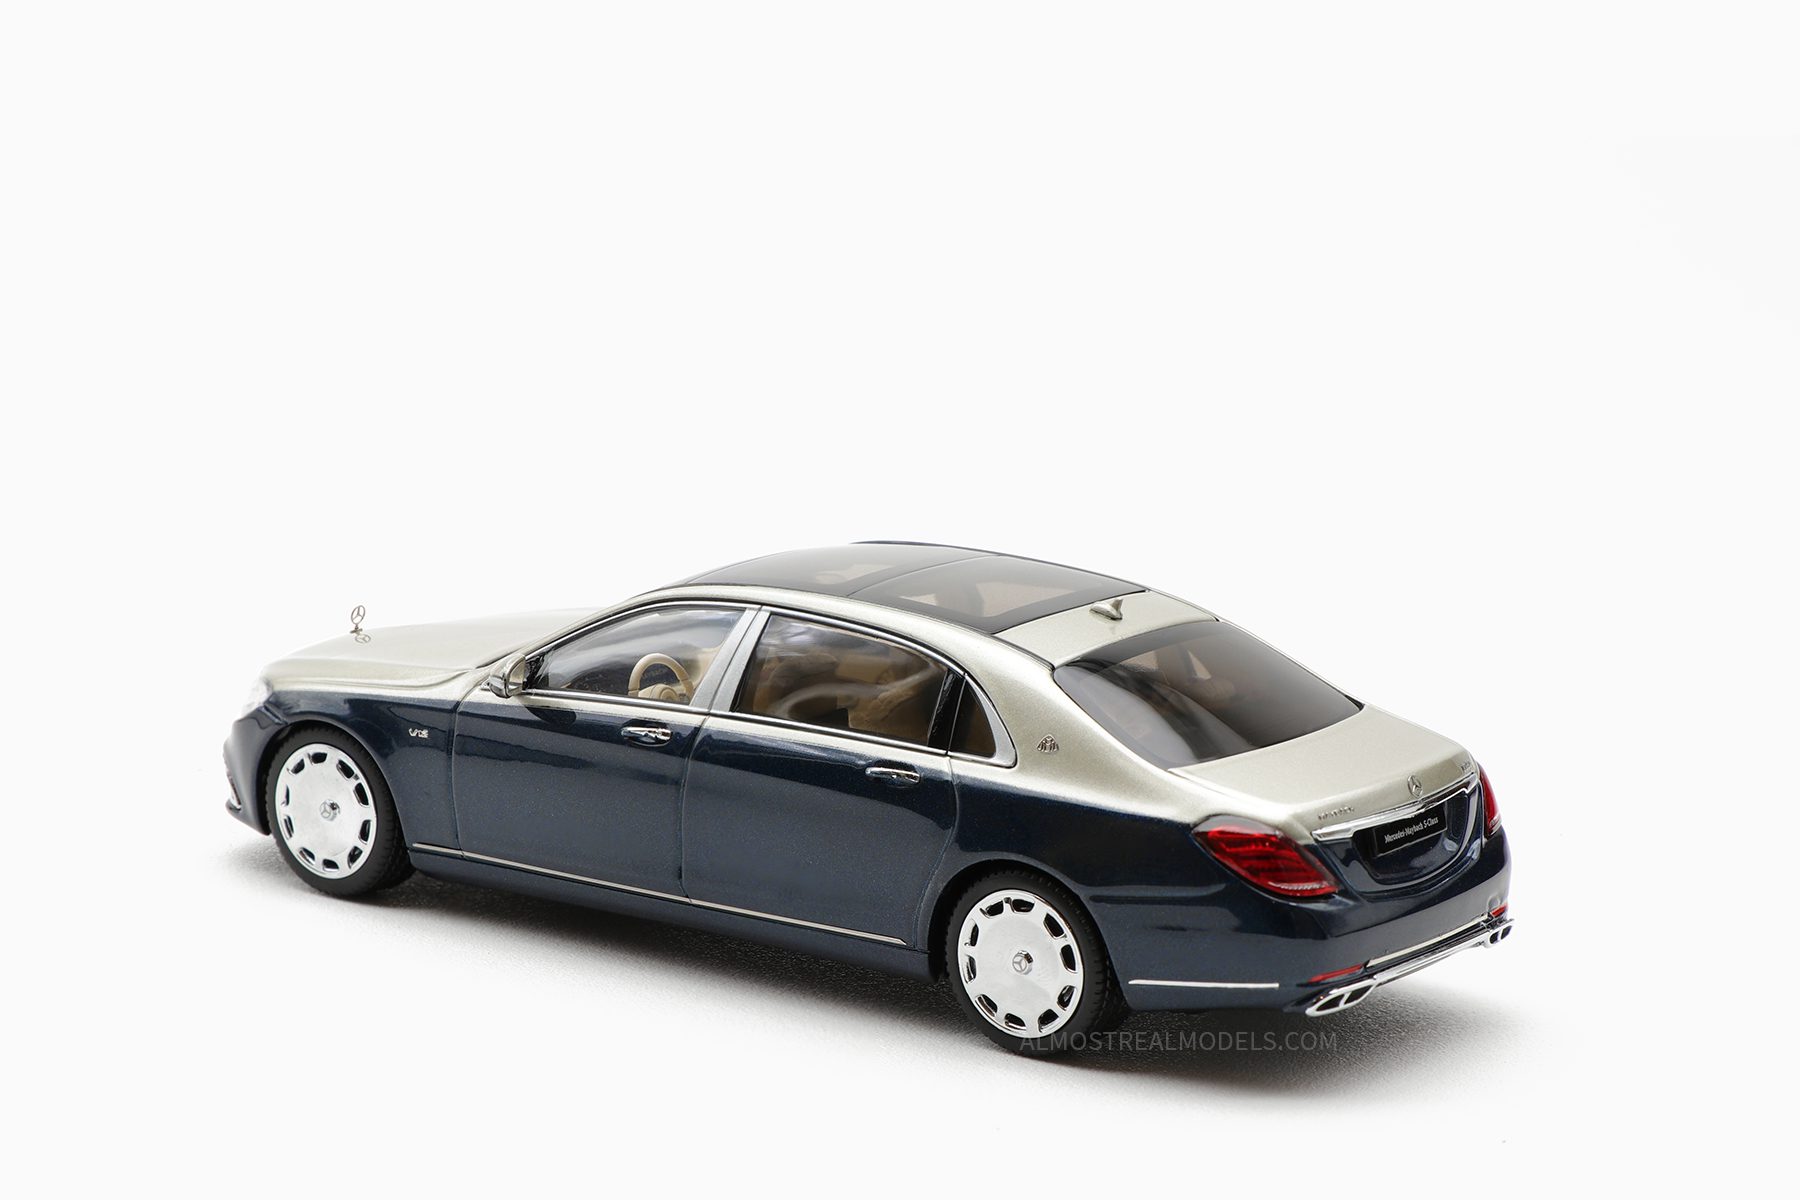 Mercedes-Maybach S-Class - 2019 - Anthracite Blue/Aragonite Silver